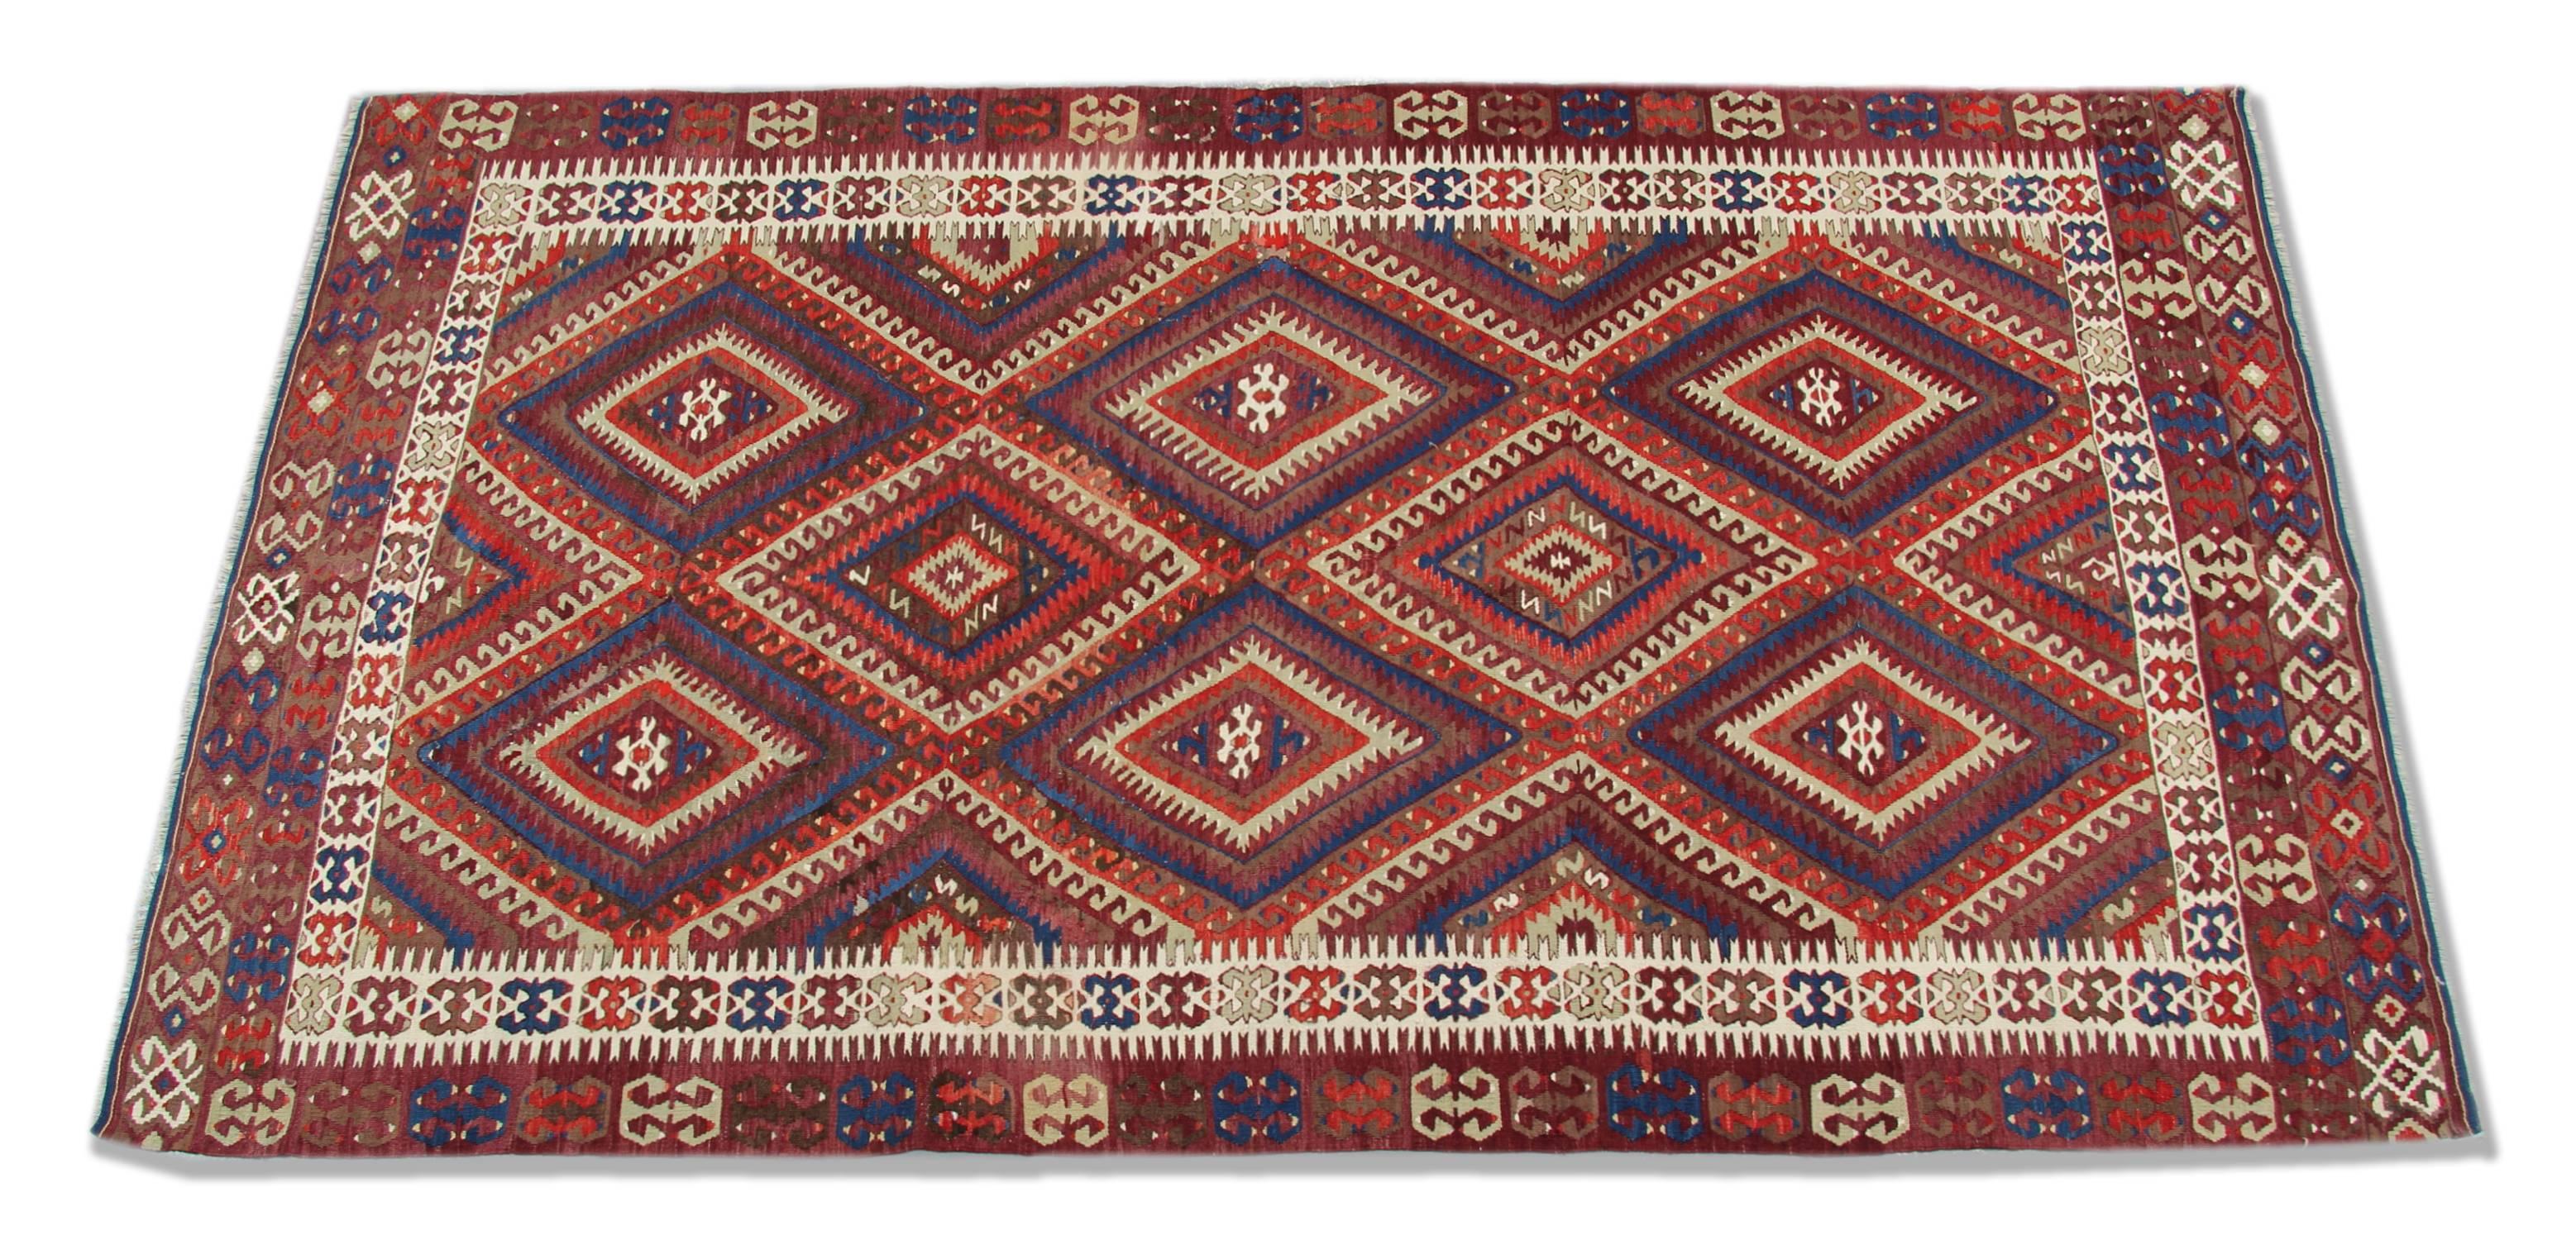 This red rug is a Turkish carpet rug has woven by very skilled weavers in Turkey, who used the highest quality wool and cotton. The flat-weave rug has dark & light red, ivory, blue, white, cream and dark brown colours. The red and blue background of